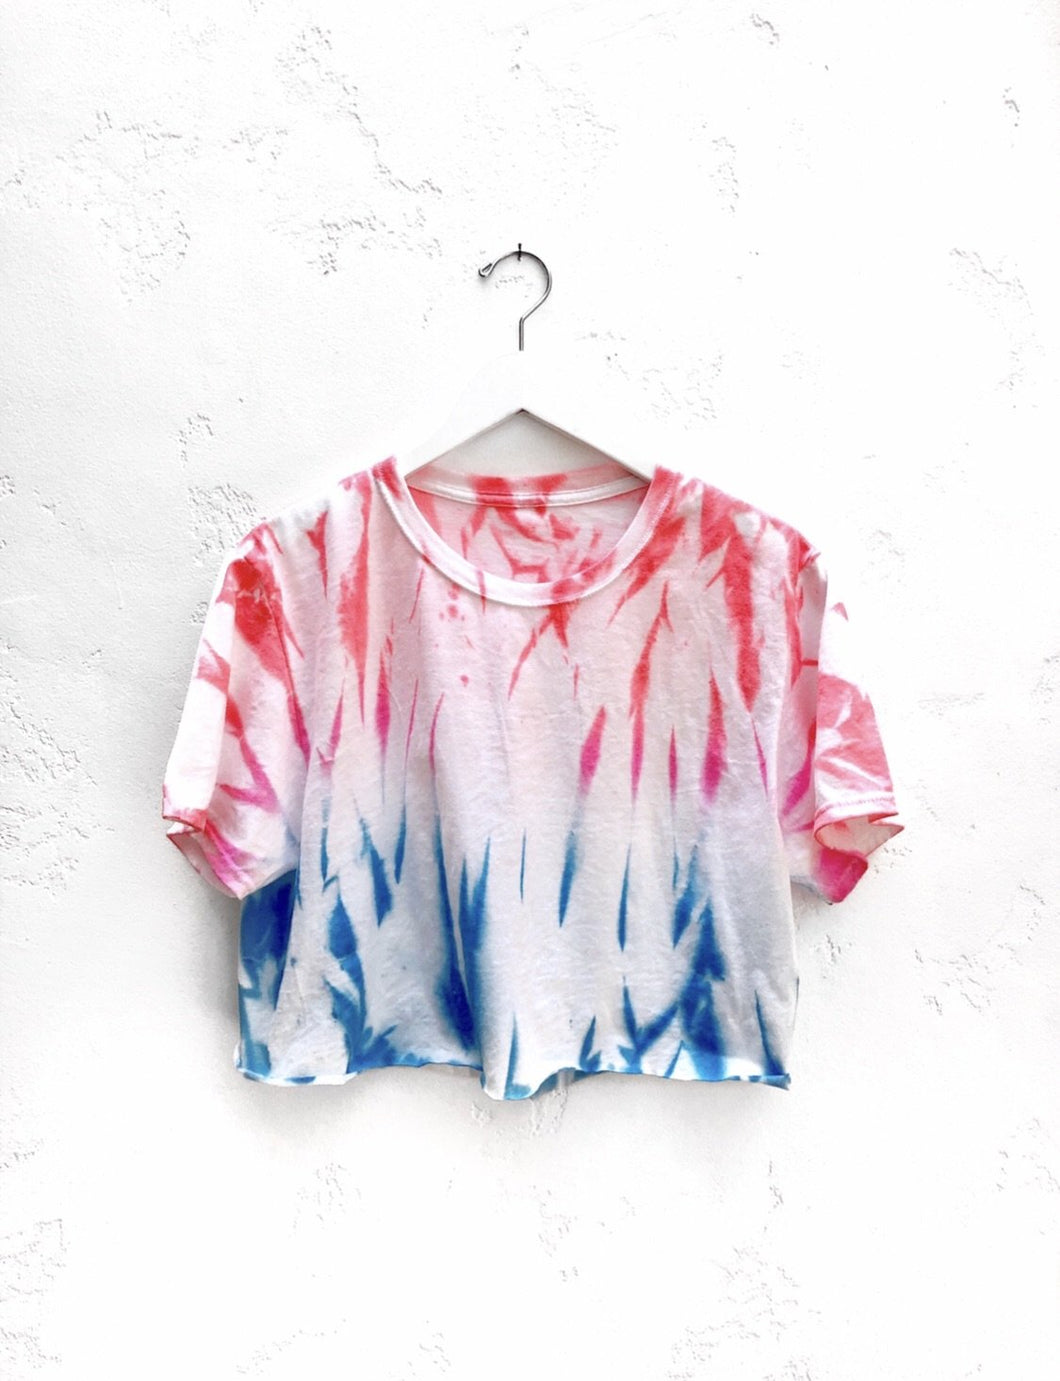 Myrrhe Ice Pop Cropped Tee in Blue and Red